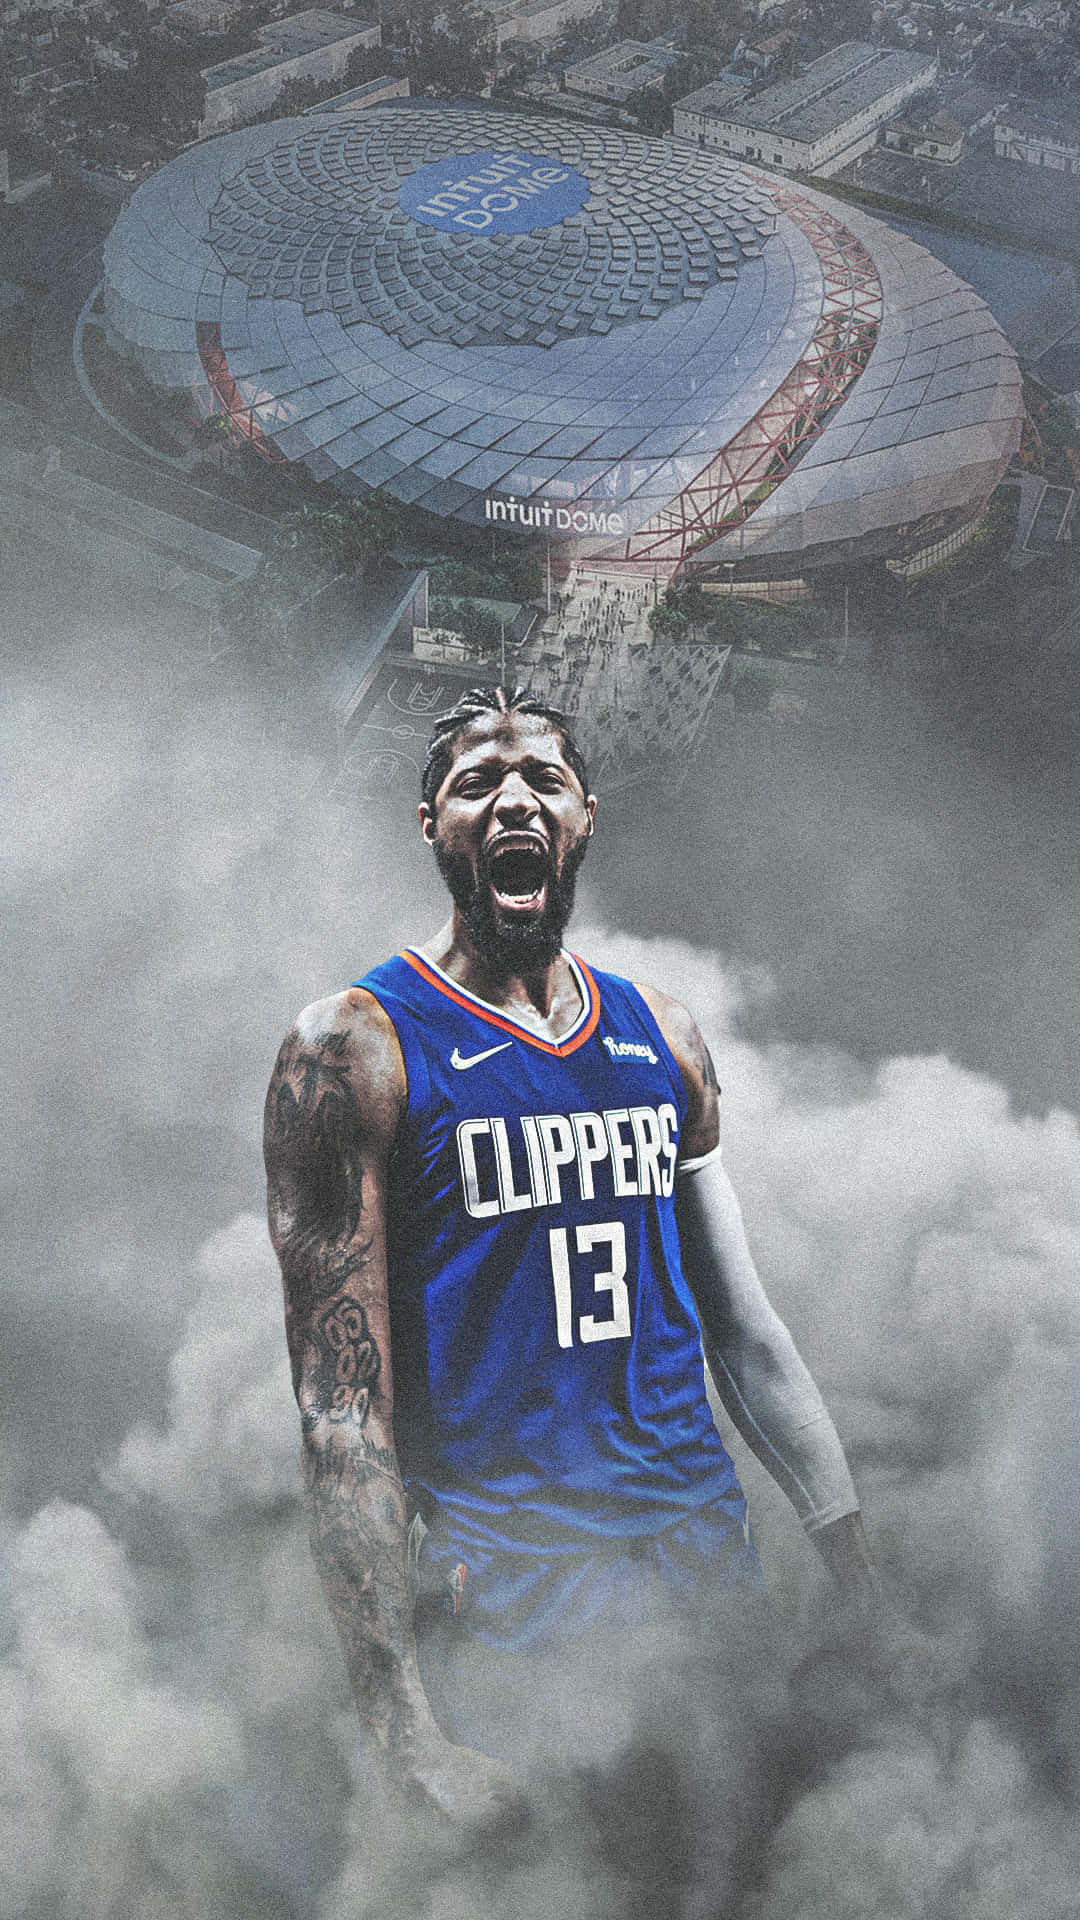 Download Paul George Clippers Dunking Wallpaper